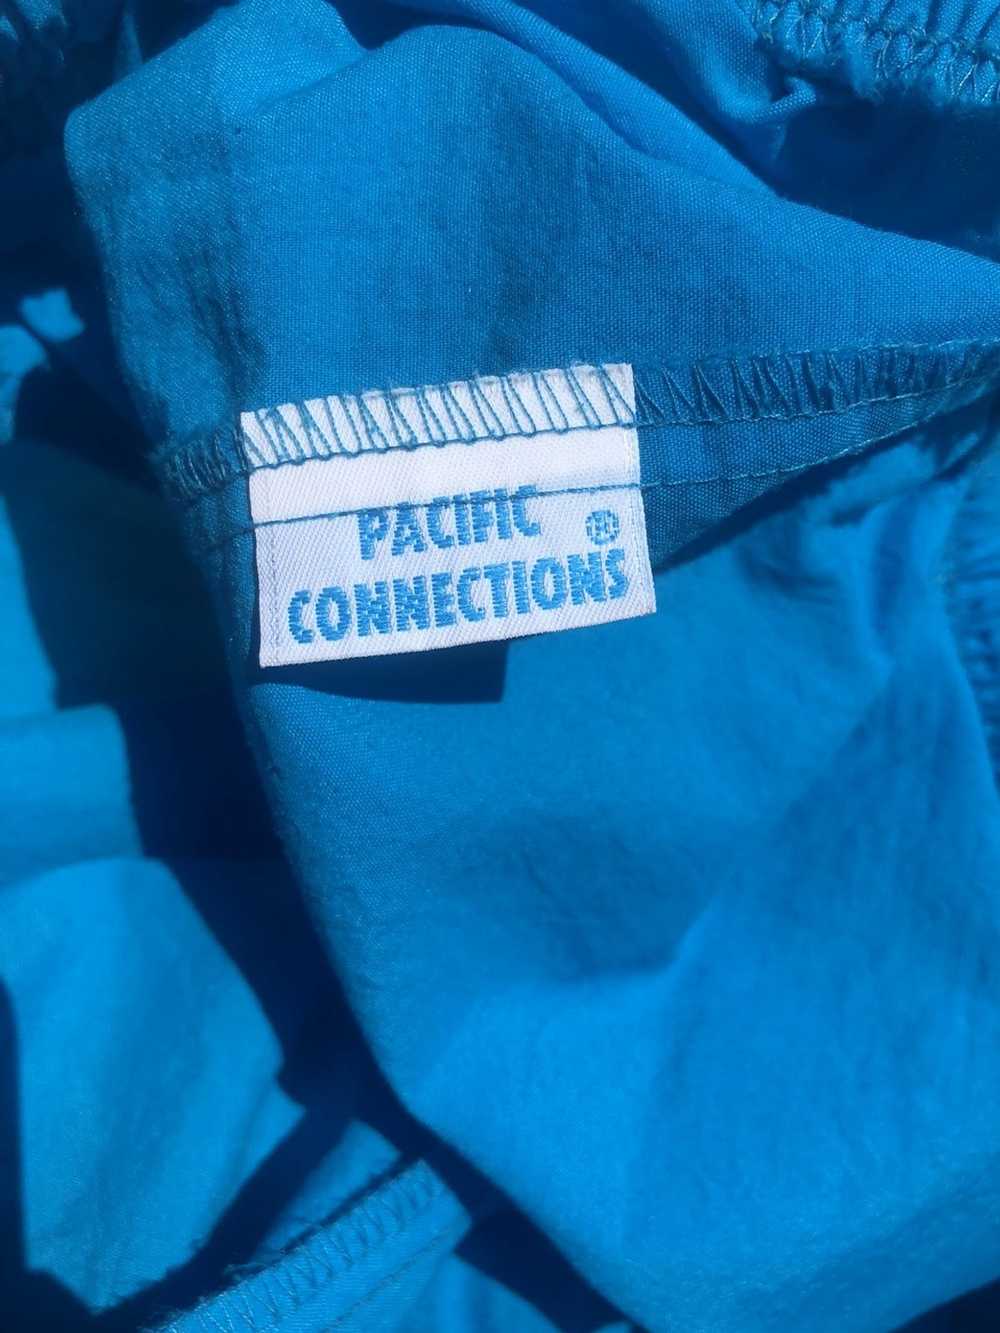 Sportswear × Vintage Shorts 5 in Pacific connecti… - image 2